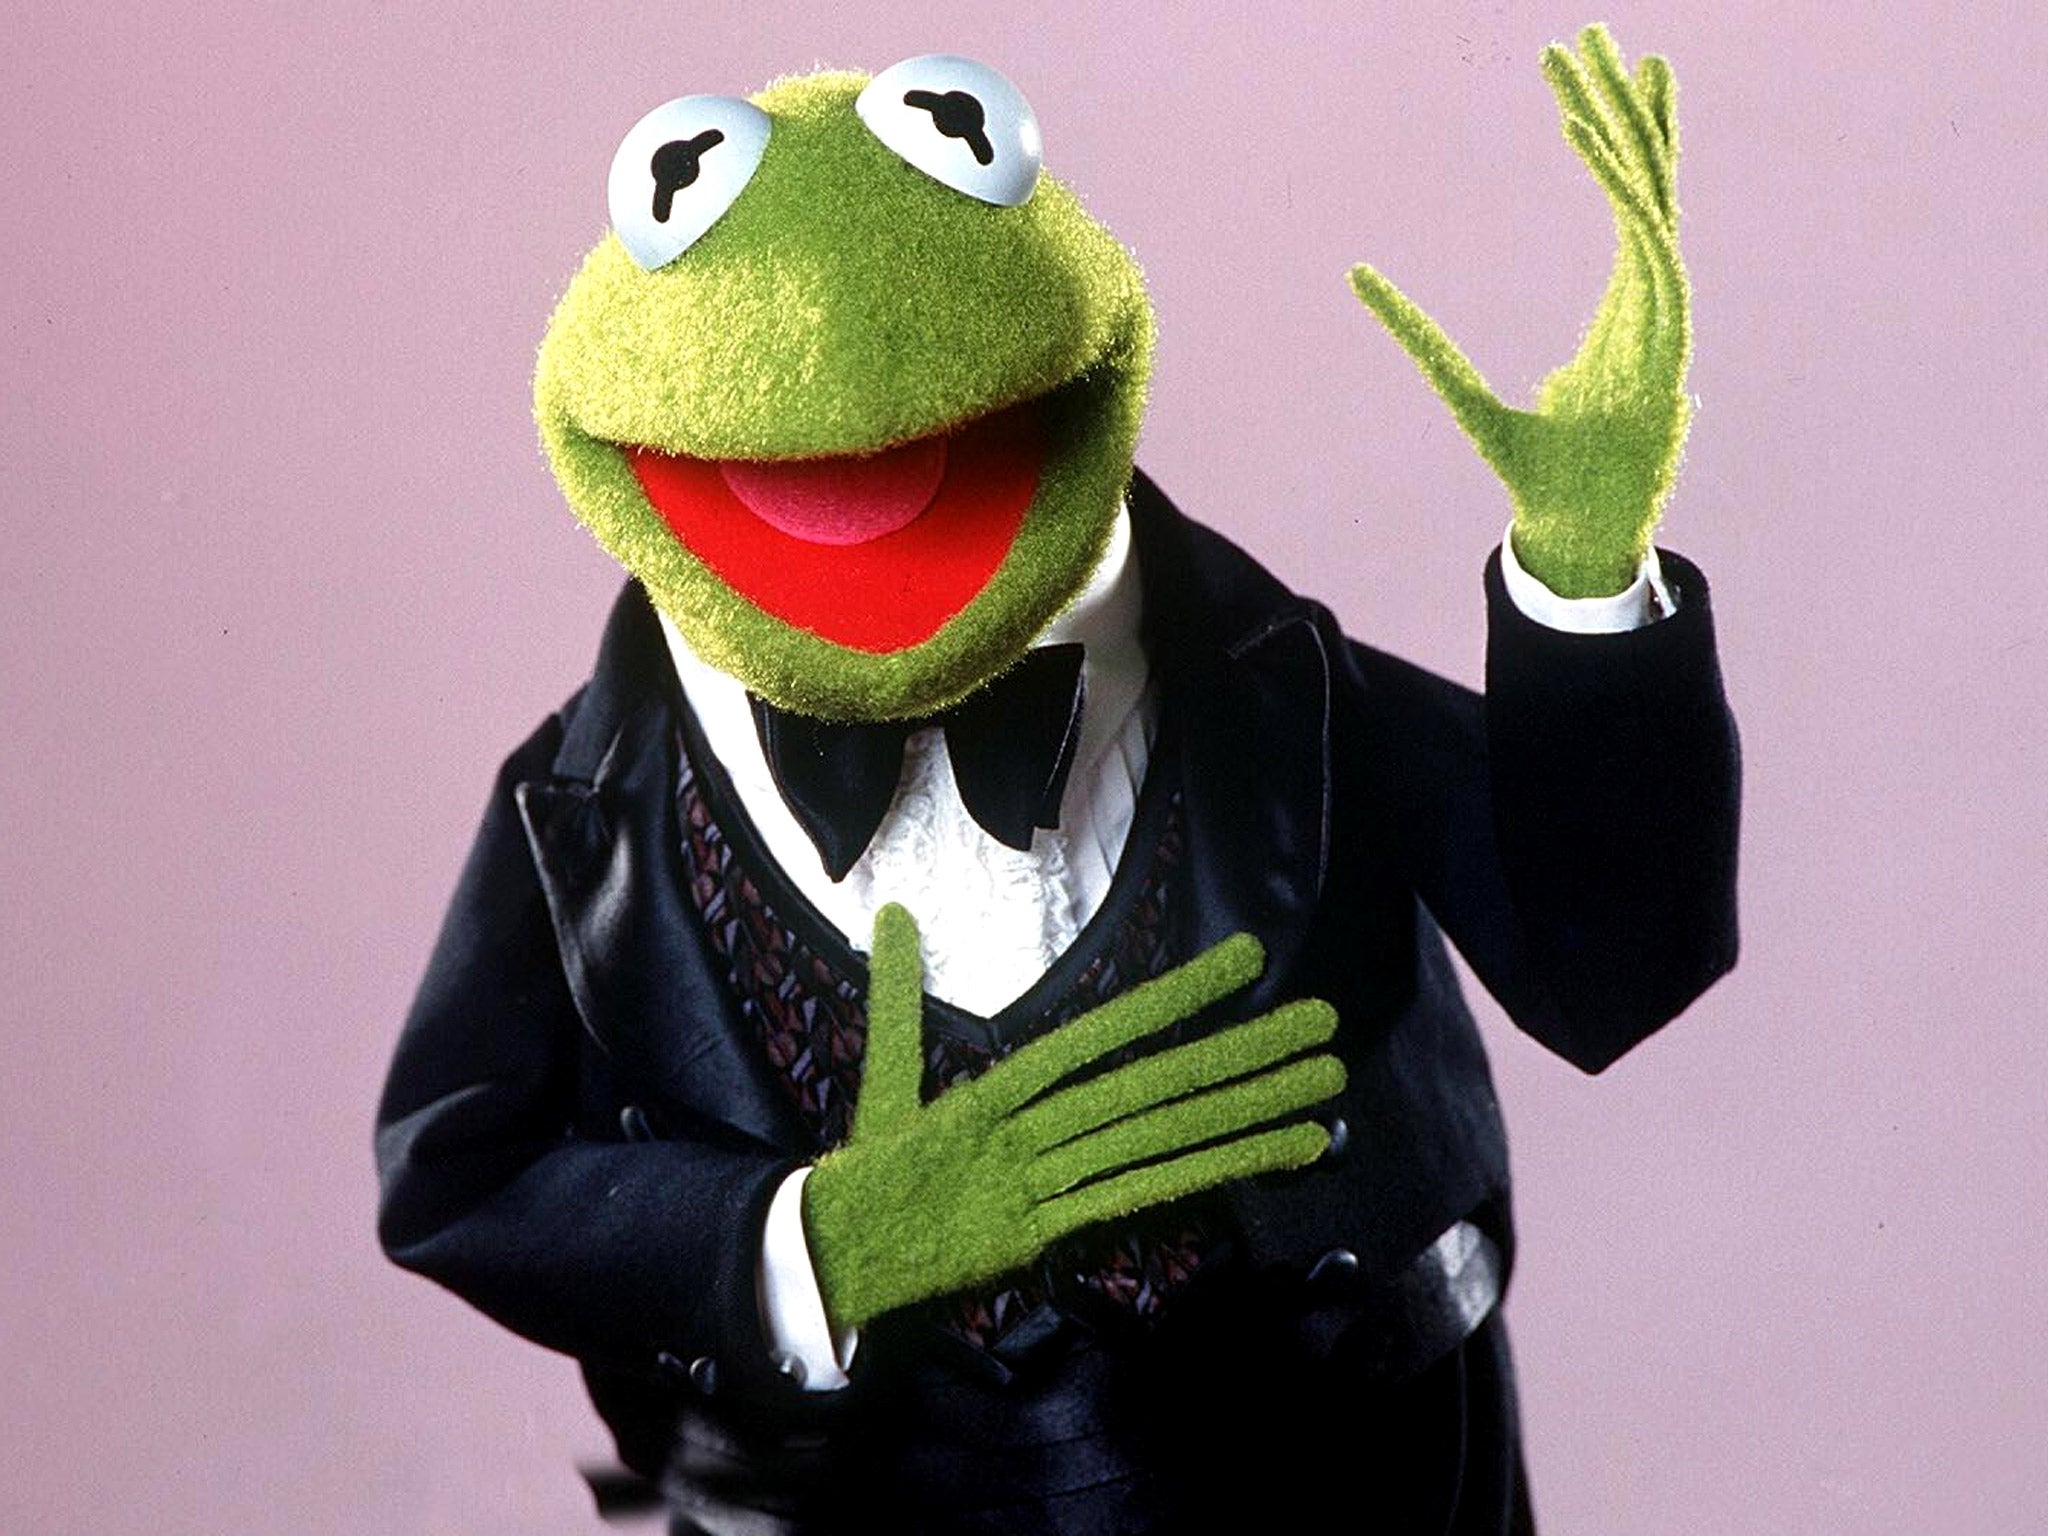 Kermit and the Muppet gang could be heading to Broadway